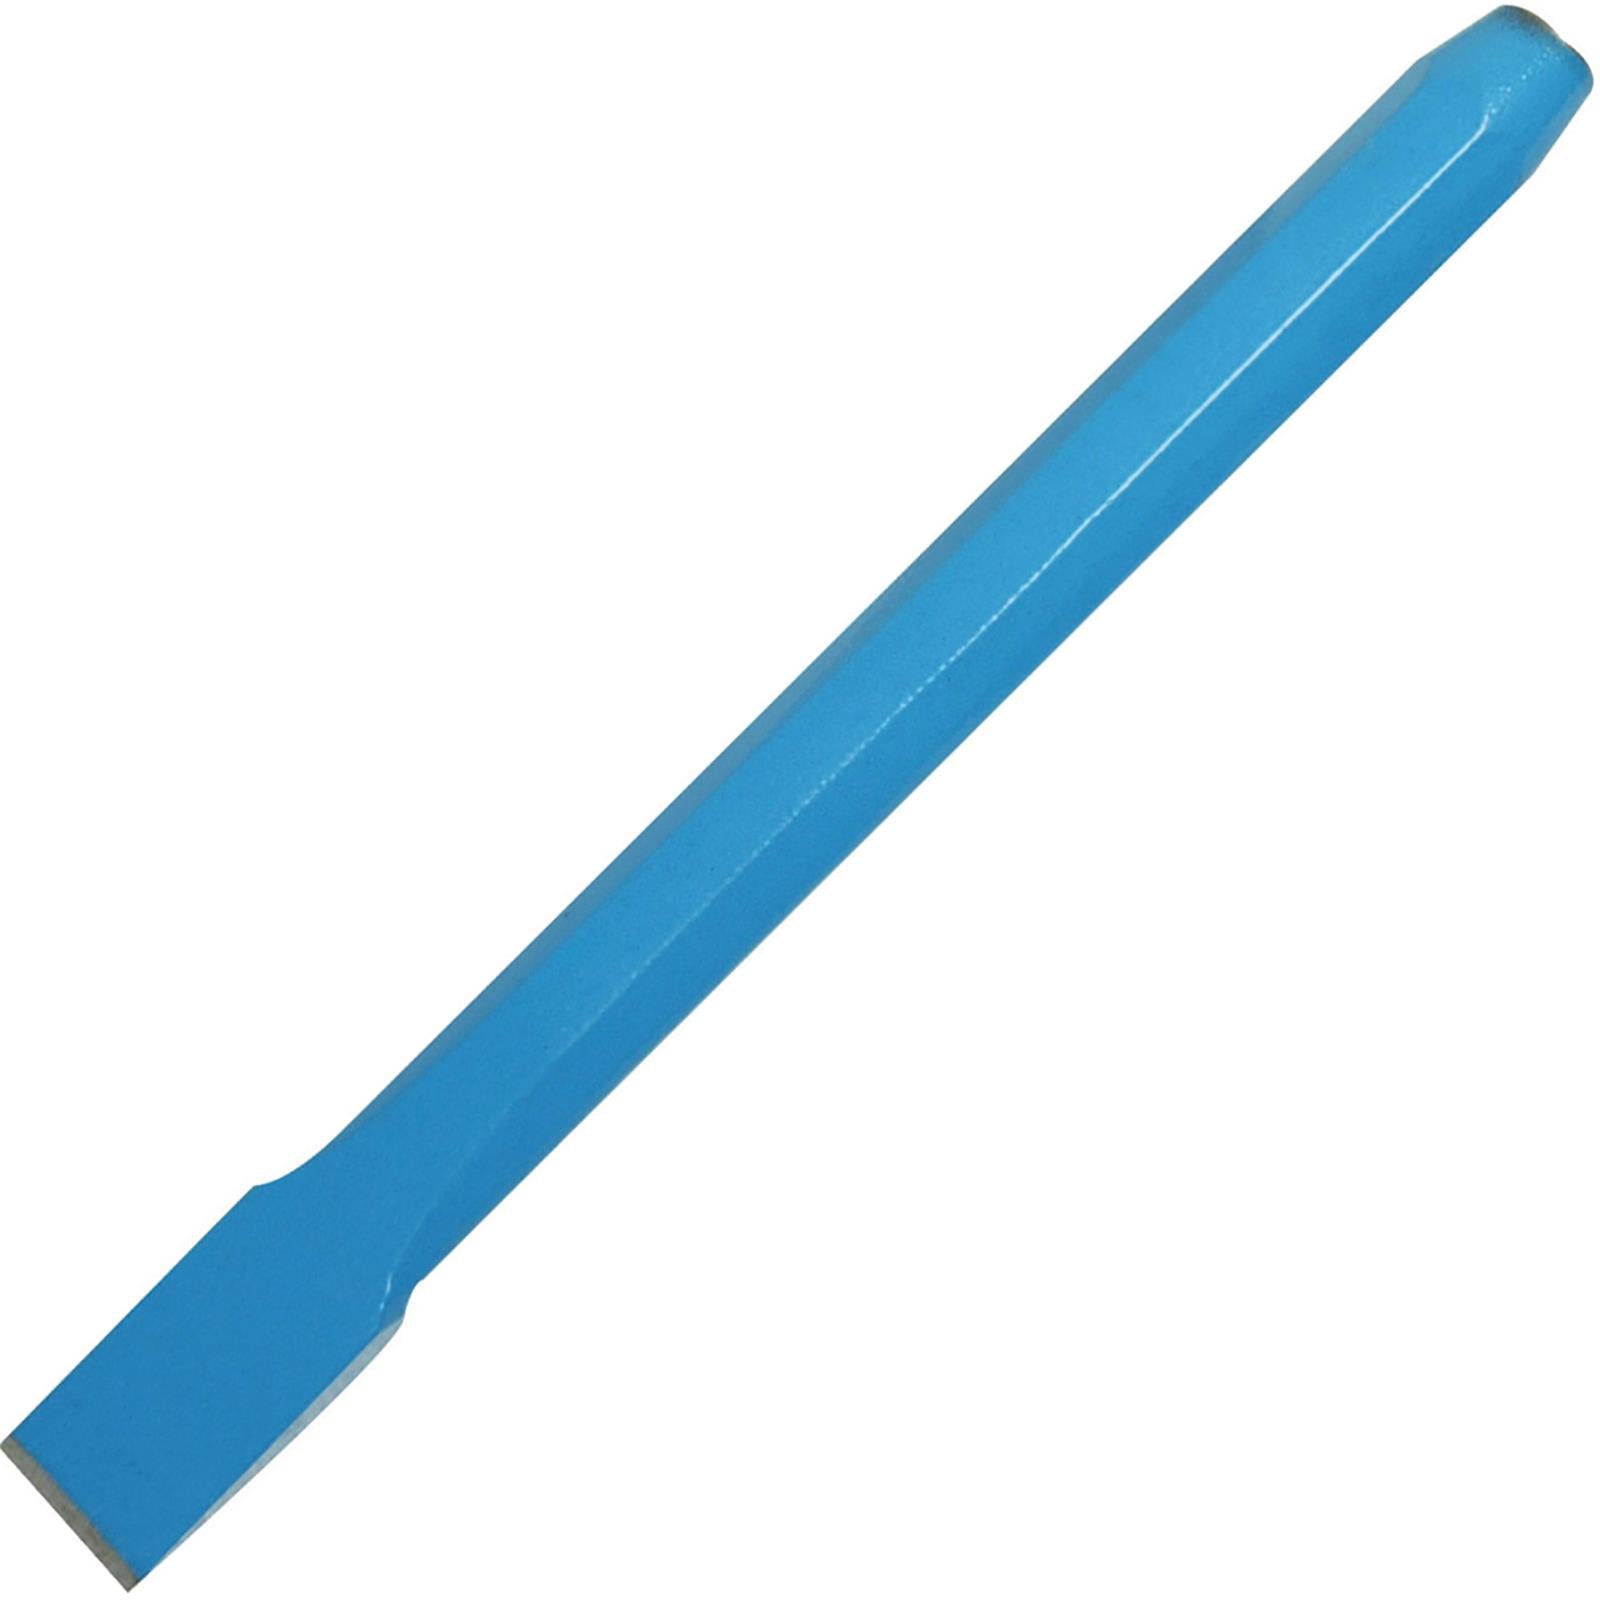 Silverline 12mm x 200mm Cold Chisel